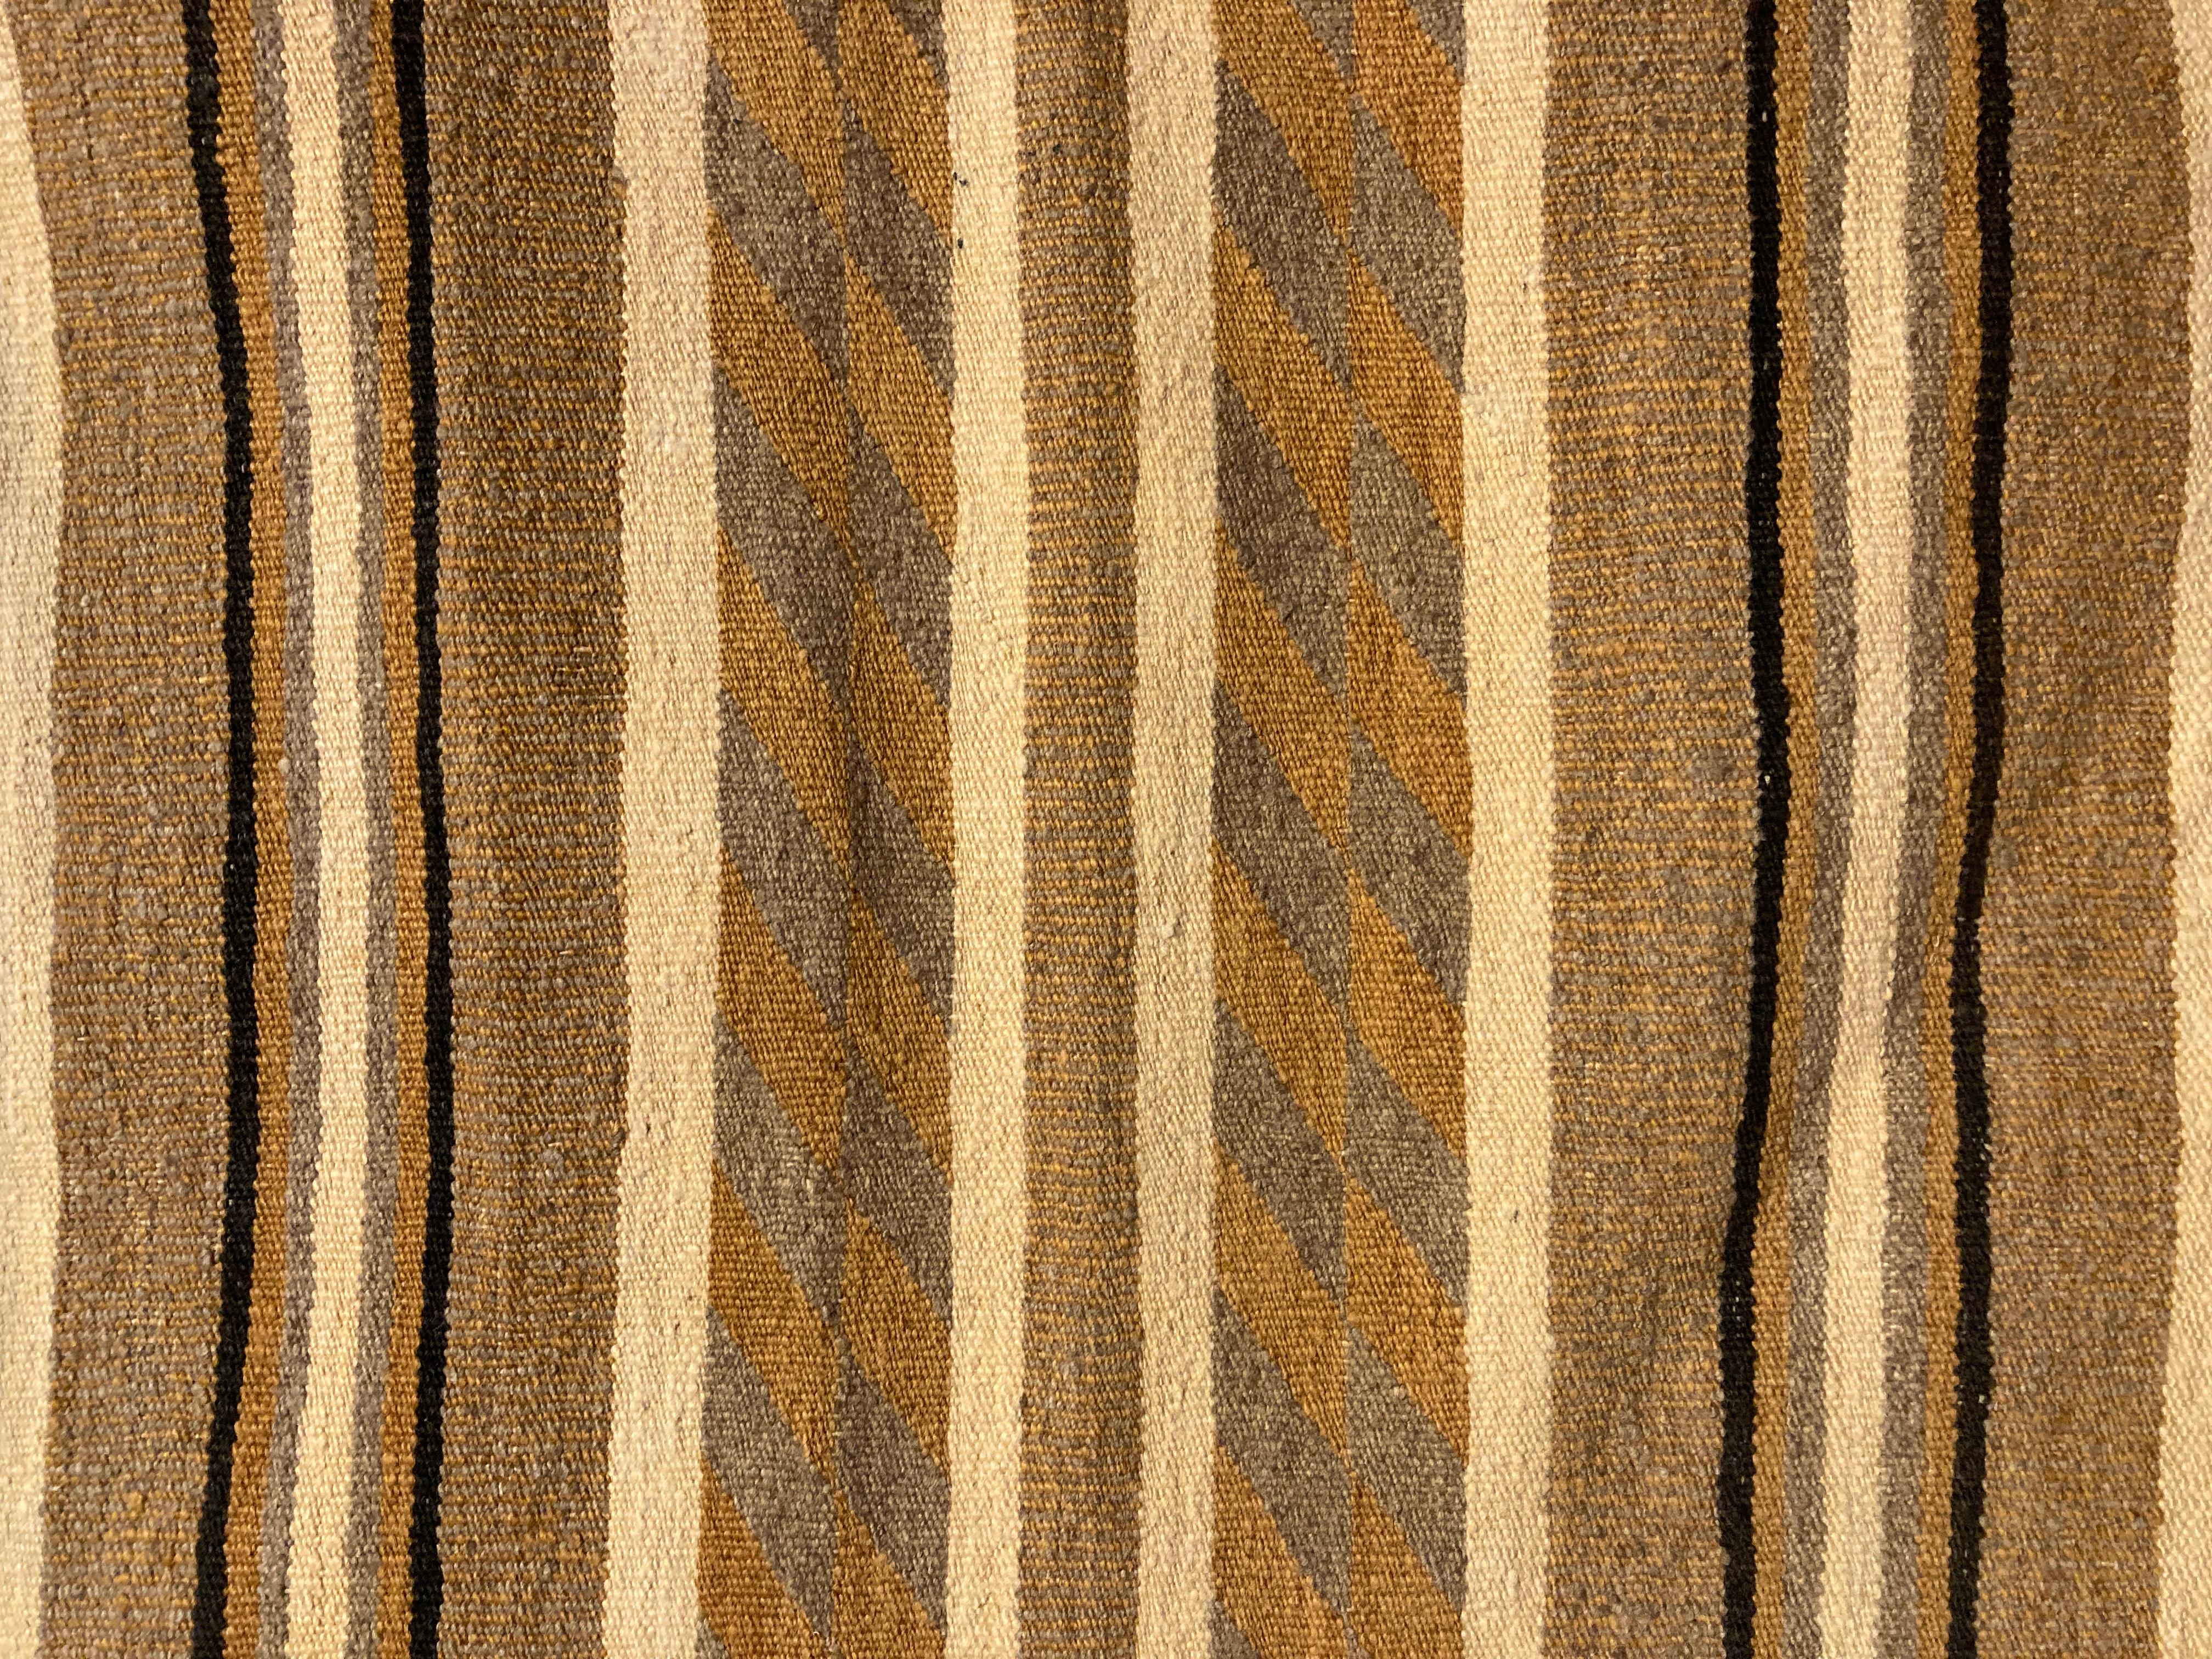 Unusual vintage Navajo rug, done in ivory, gold, un-dyed grey and dark brown wool, has a serene, contemporary look.